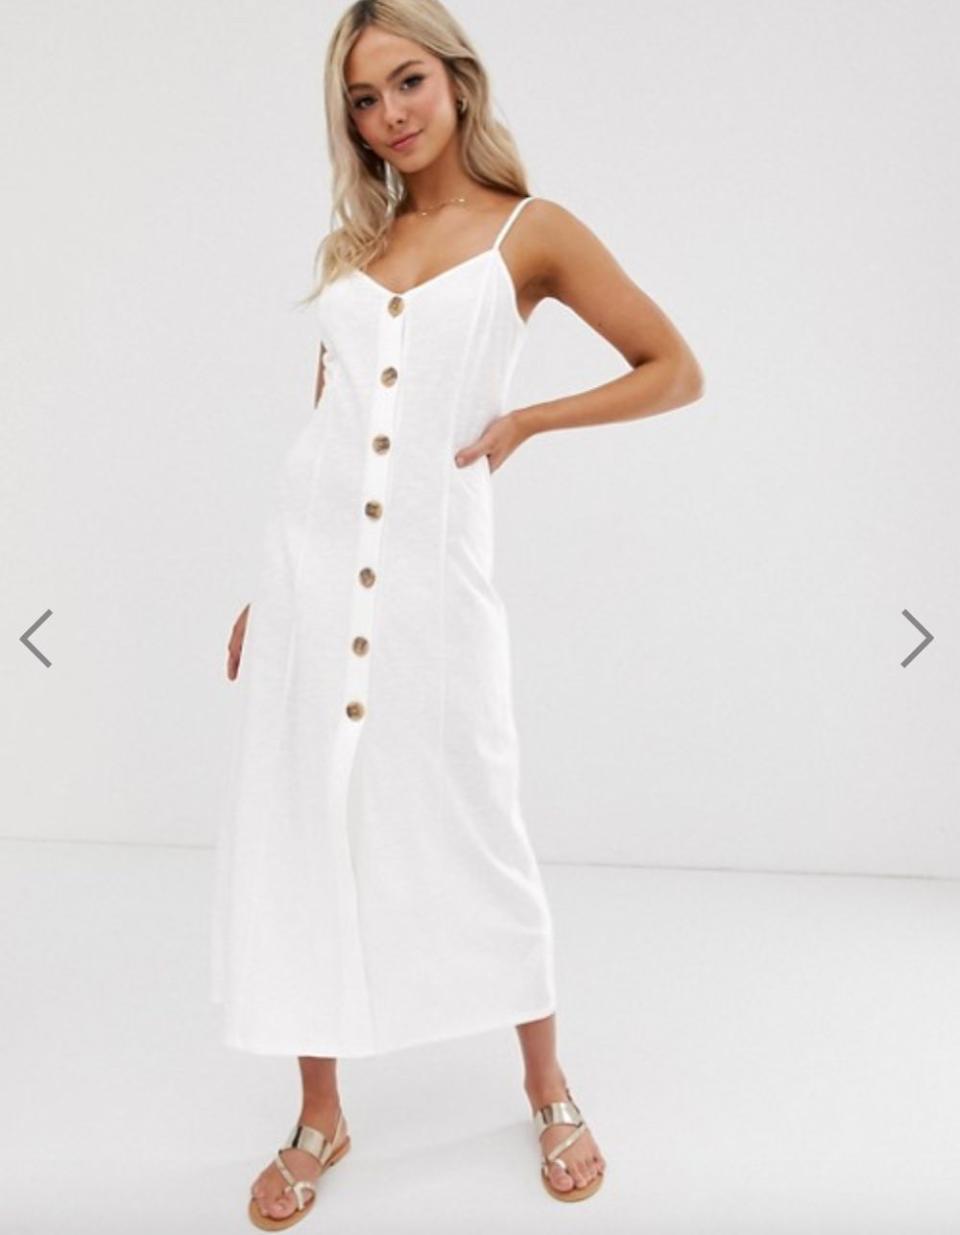 <strong><a href="https://fave.co/2HuPyxi" target="_blank" rel="noopener noreferrer">Originally $35, get it for 25% off on ASOS.﻿</a></strong>